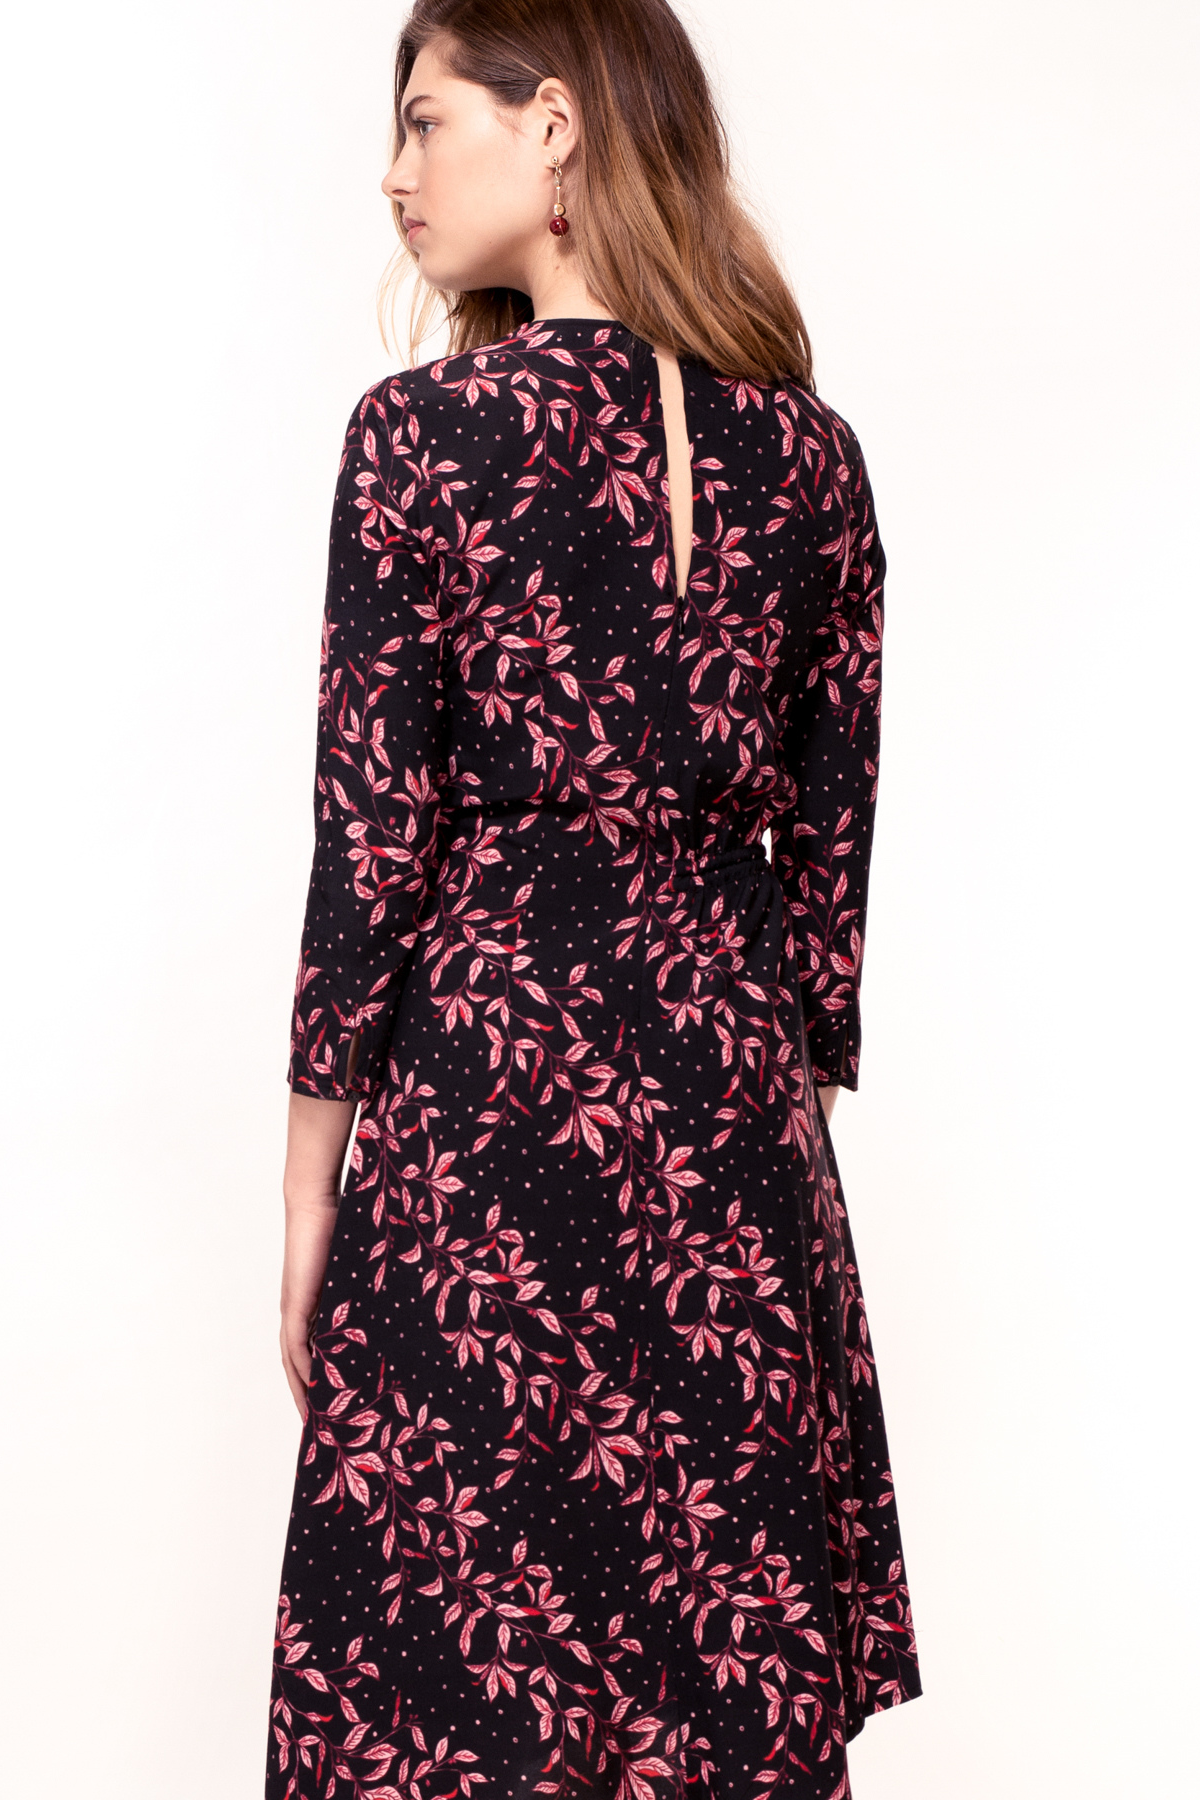 Hide the Label Azalea Dress in Pink Leaf Print, available on ZERRIN